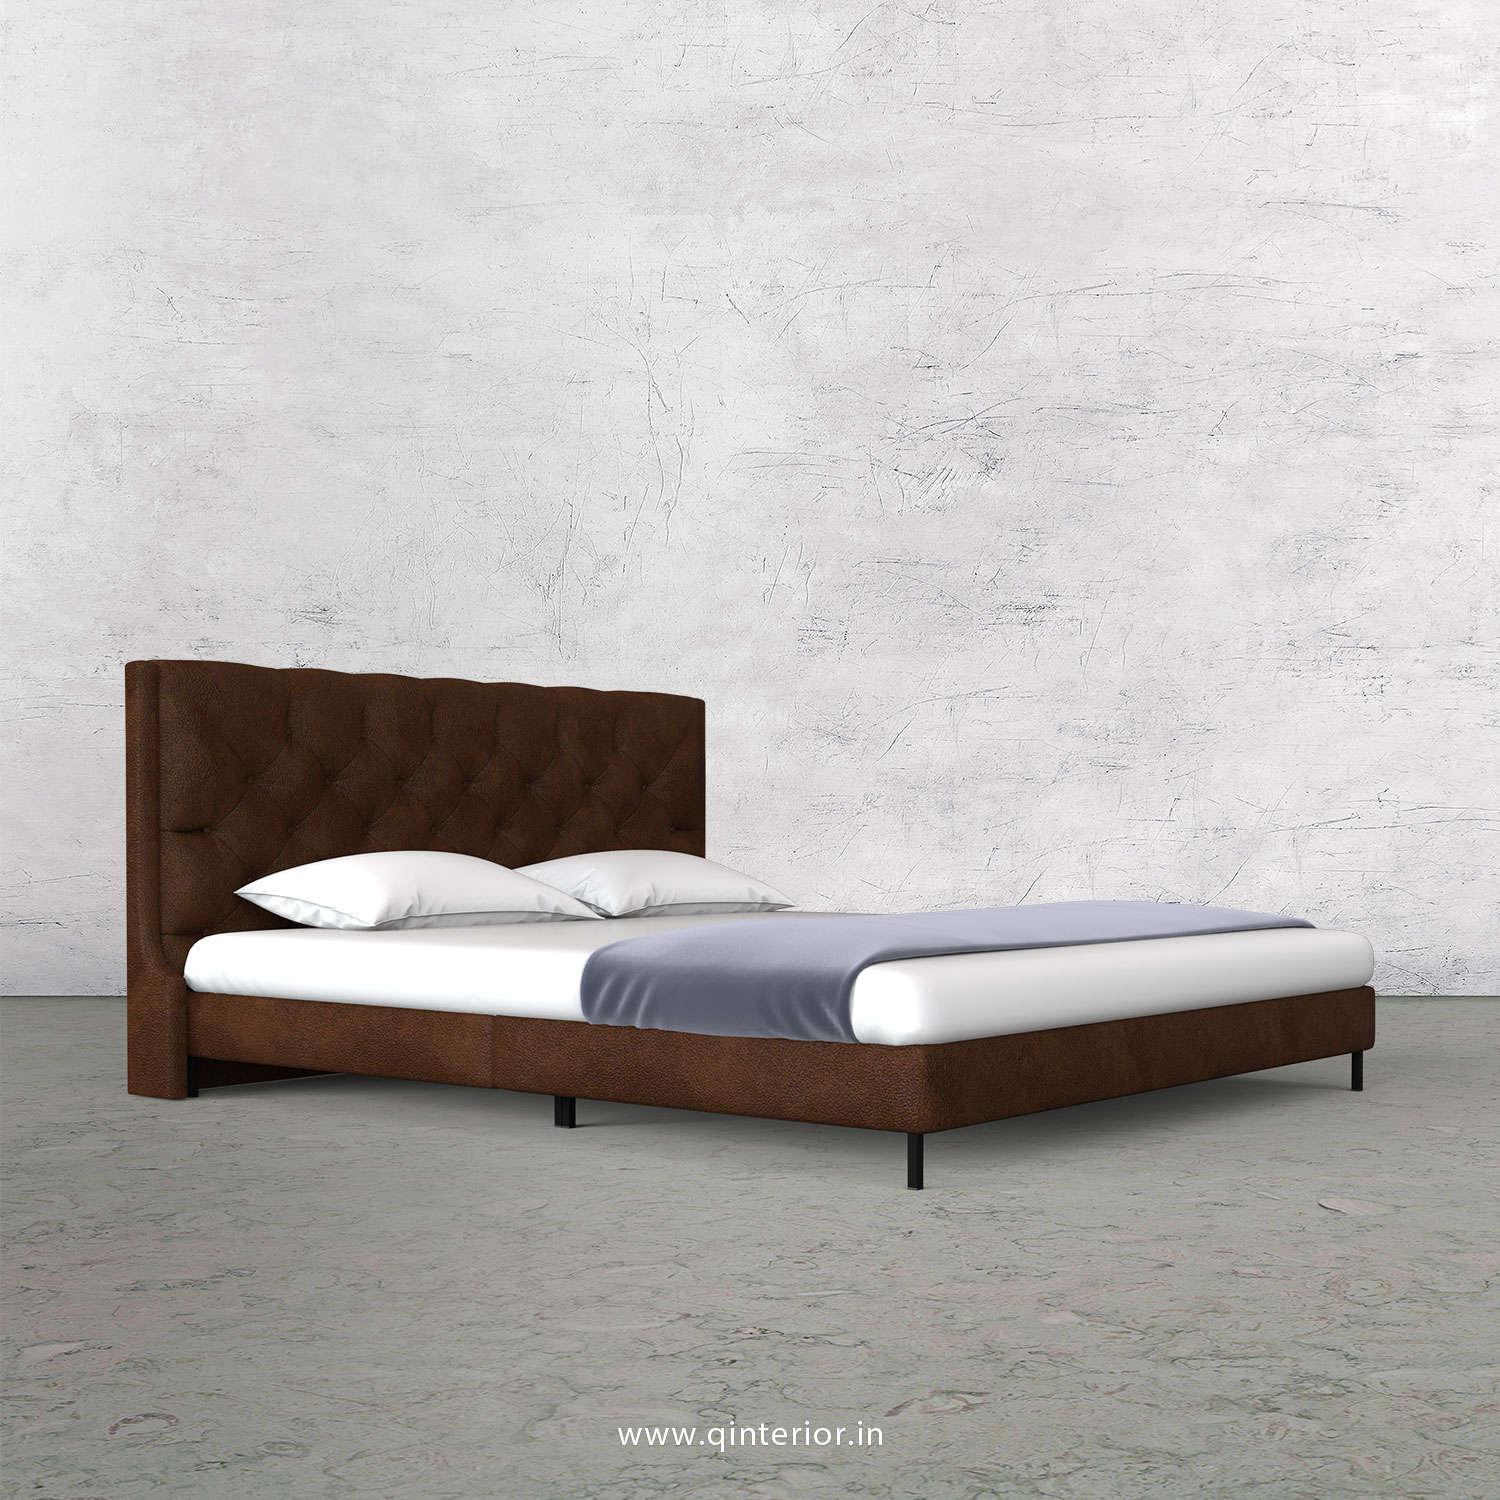 Scorpius Queen Size Bed with Fab Leather Fabric - QBD003 FL09